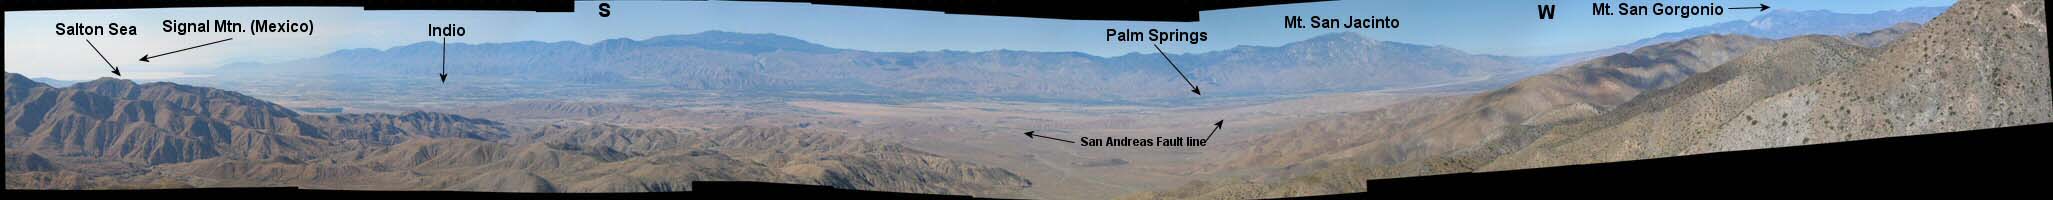 panoramic image from Keys View -- note infamous San Andreas fault line. Also note the elevation gain between Mt. San Jacinto and San Gorgonio. This is the San Gorgonio Pass, through which I-10 passes. This pass maxes out at roughly 2,600 ft near the city Beaumont, California (not visible in this image) 